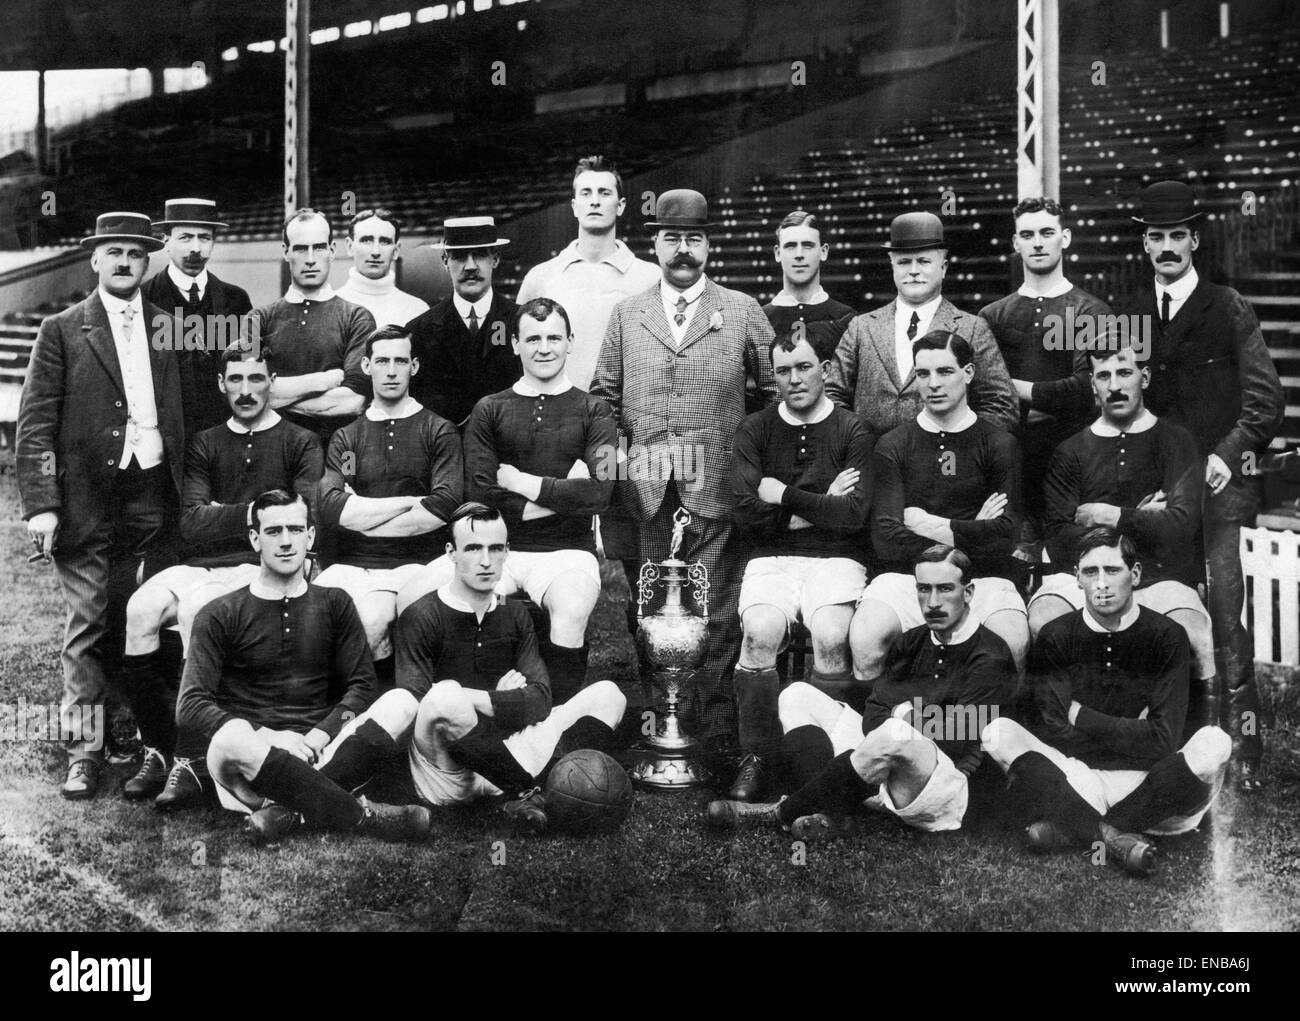 Manchester United team pose for a group photograph with the League Championship trophy. Standing left to right: J. E. Magnall (Secretary), F. Bacon, Picken, Edmonds, Mr Murray (Director), Moger, Mr H Davies, T Homer, Mr Lawton (Director), A Bell, Mr Deaki Stock Photo